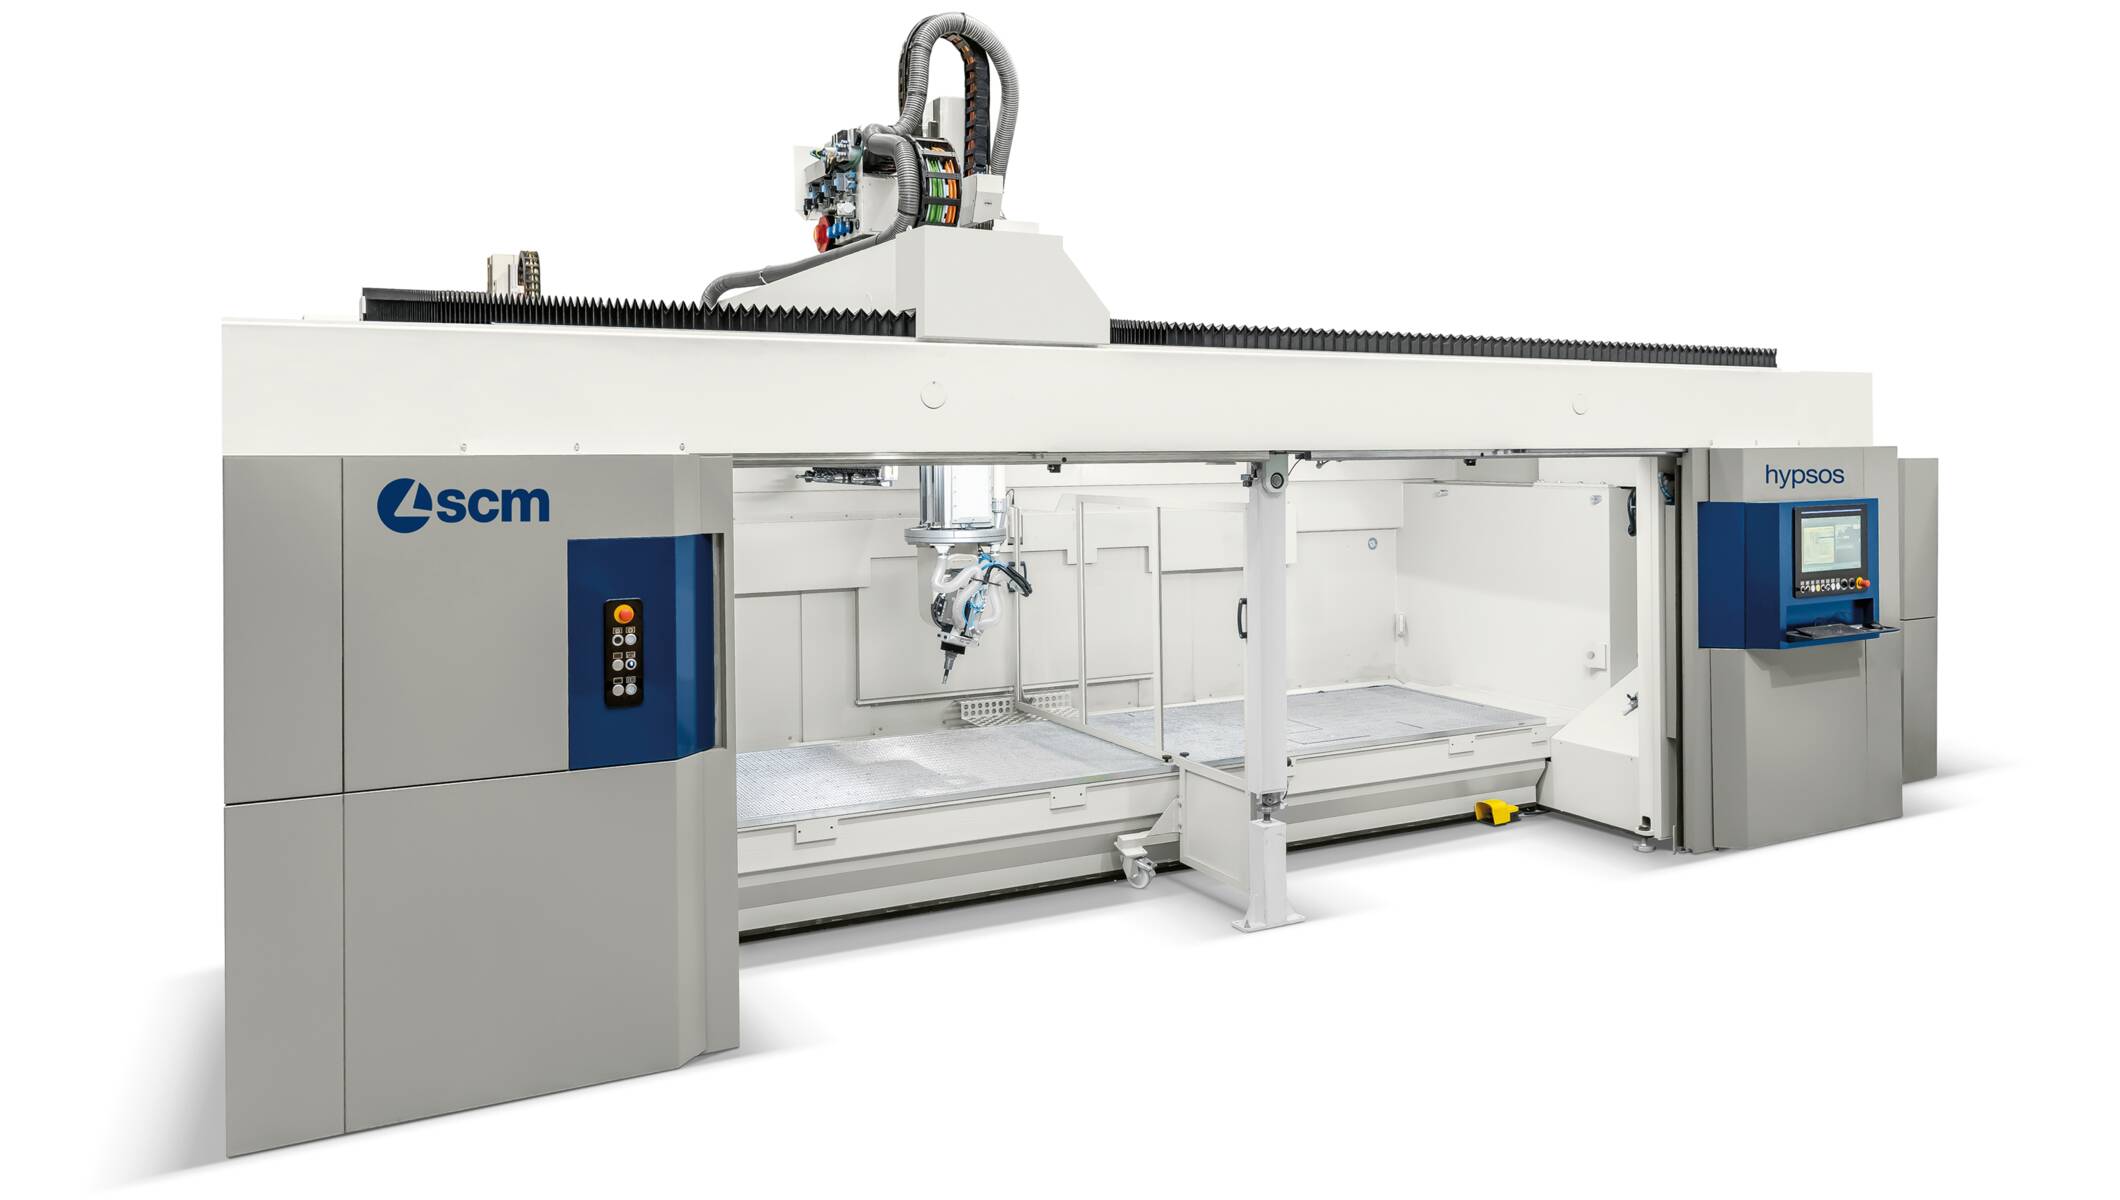 CNC Machining Centers - CNC Machining Centers for routing and drilling - hypsos